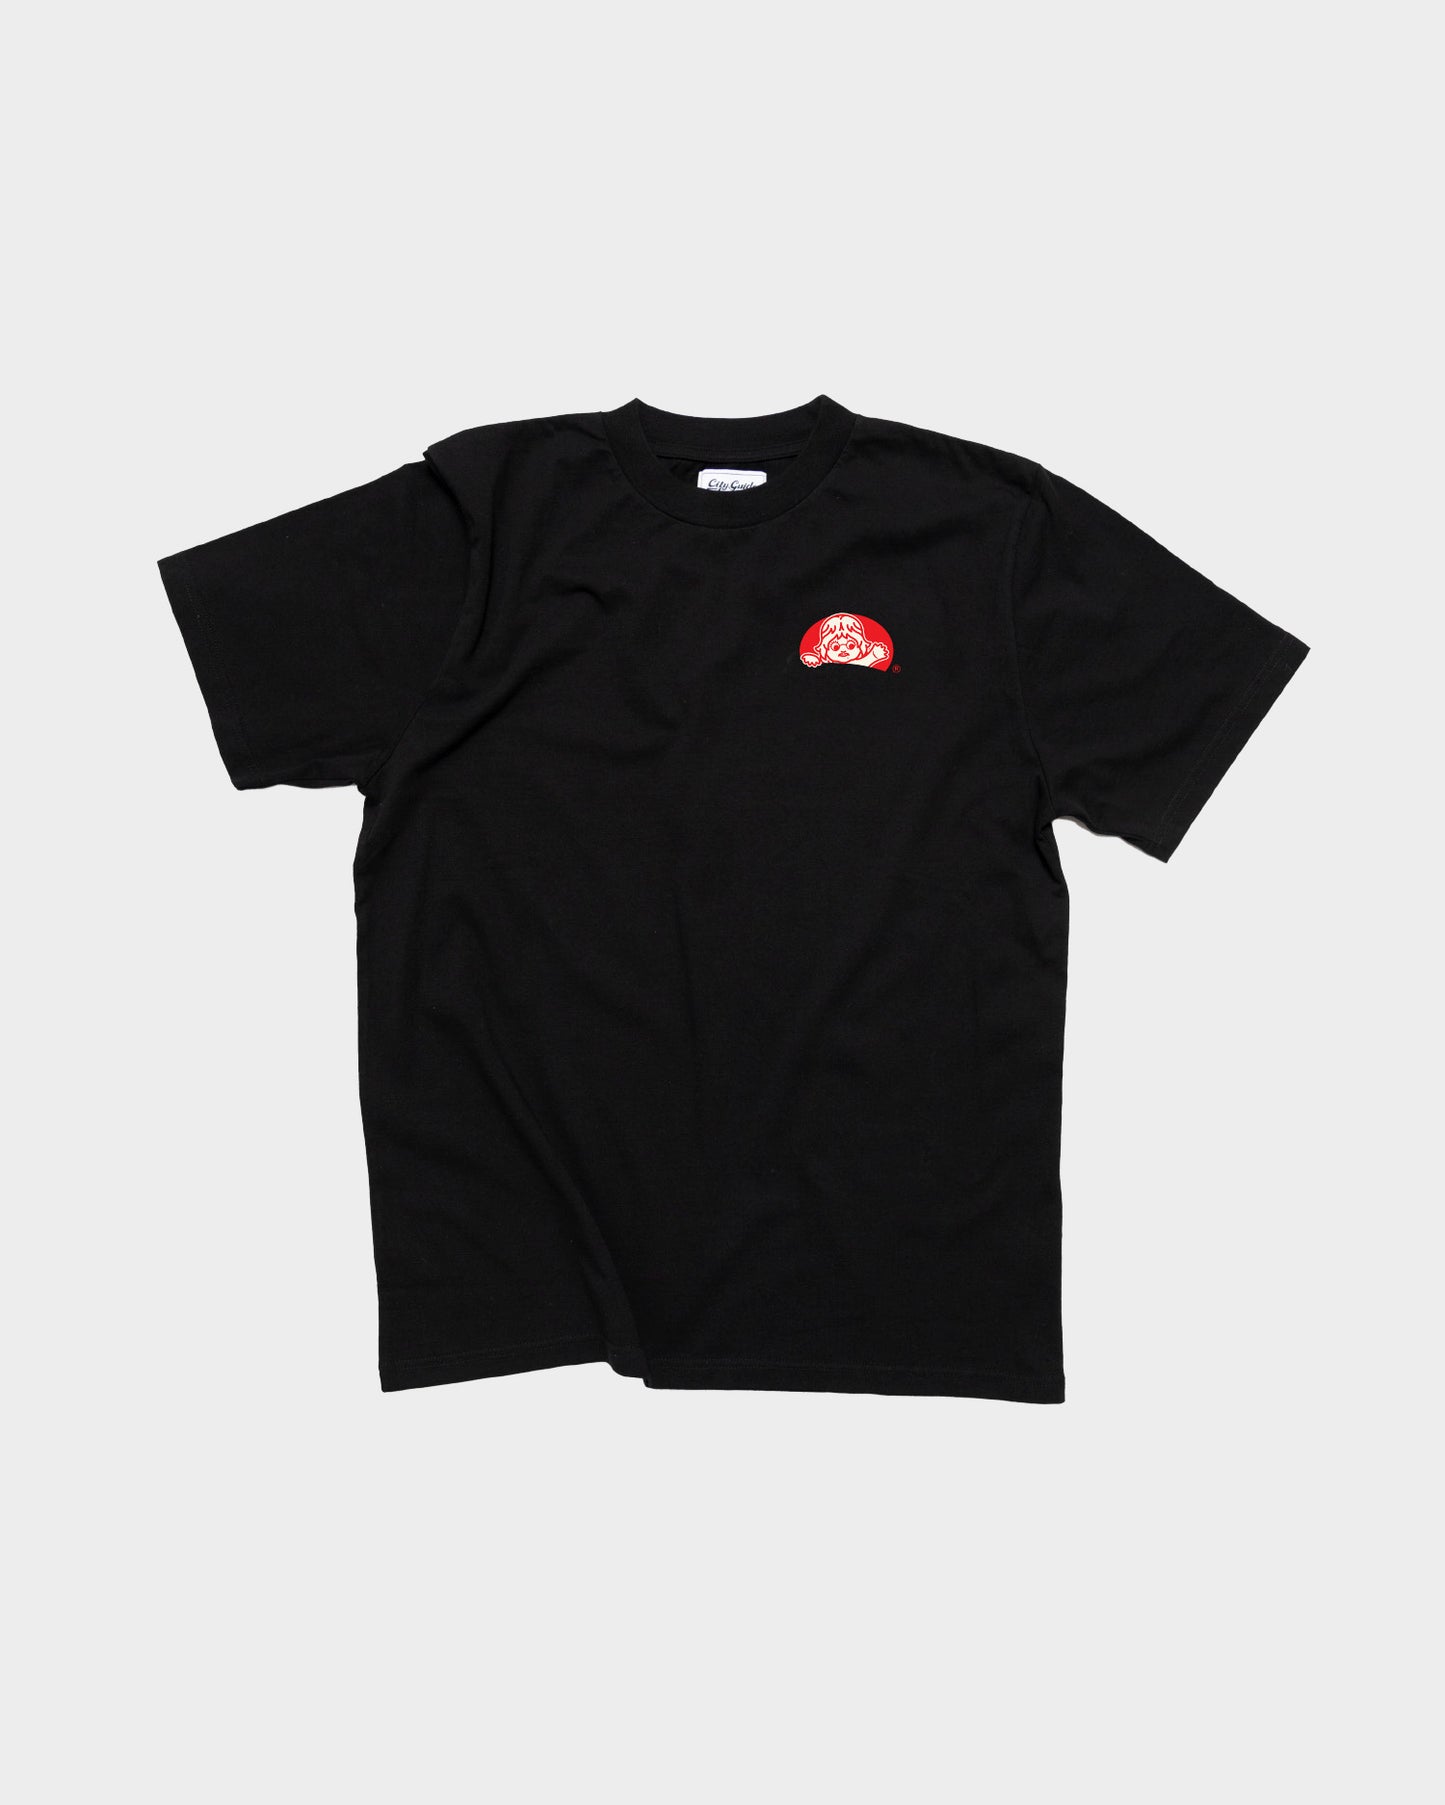 Bodega Nord Tee "Approved by Series" Black